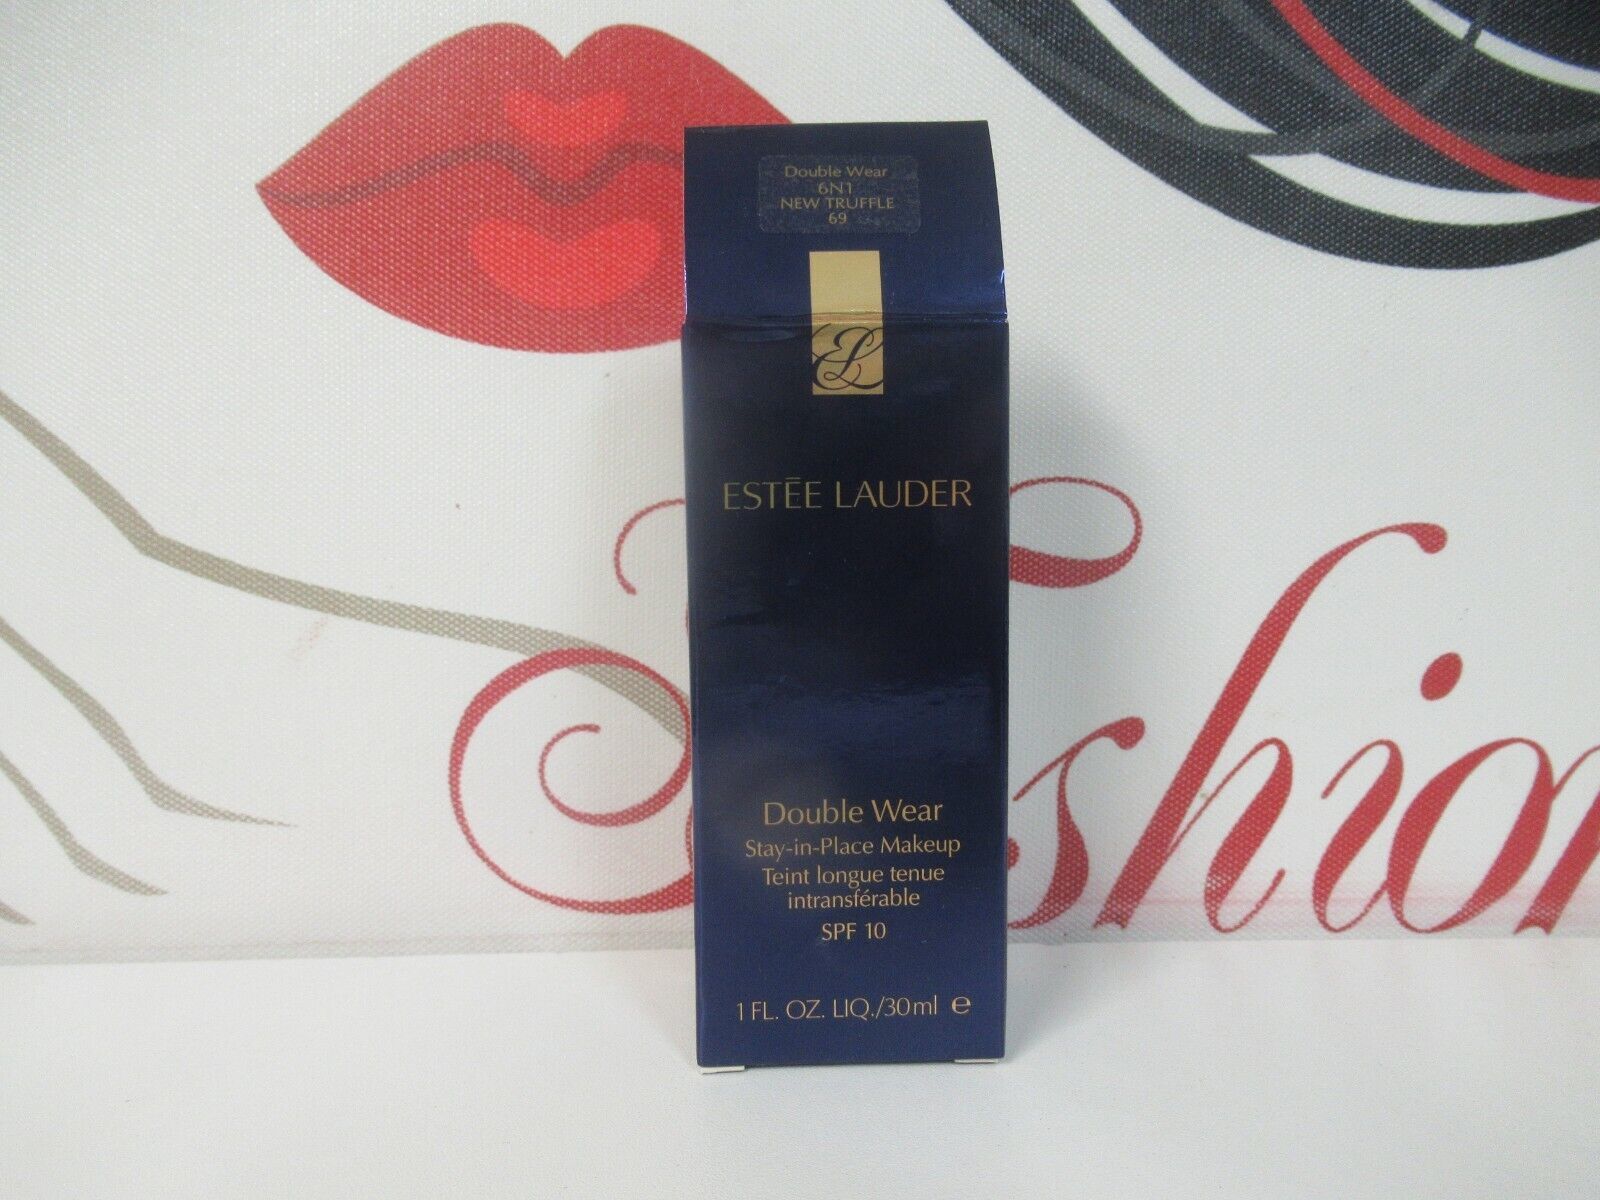 ESTEE LAUDER DOUBLE WEAR STAY IN PLACE MAKEUP 6N1 NEW TRUFFLE 69 SPF 10 1 OZ BOX